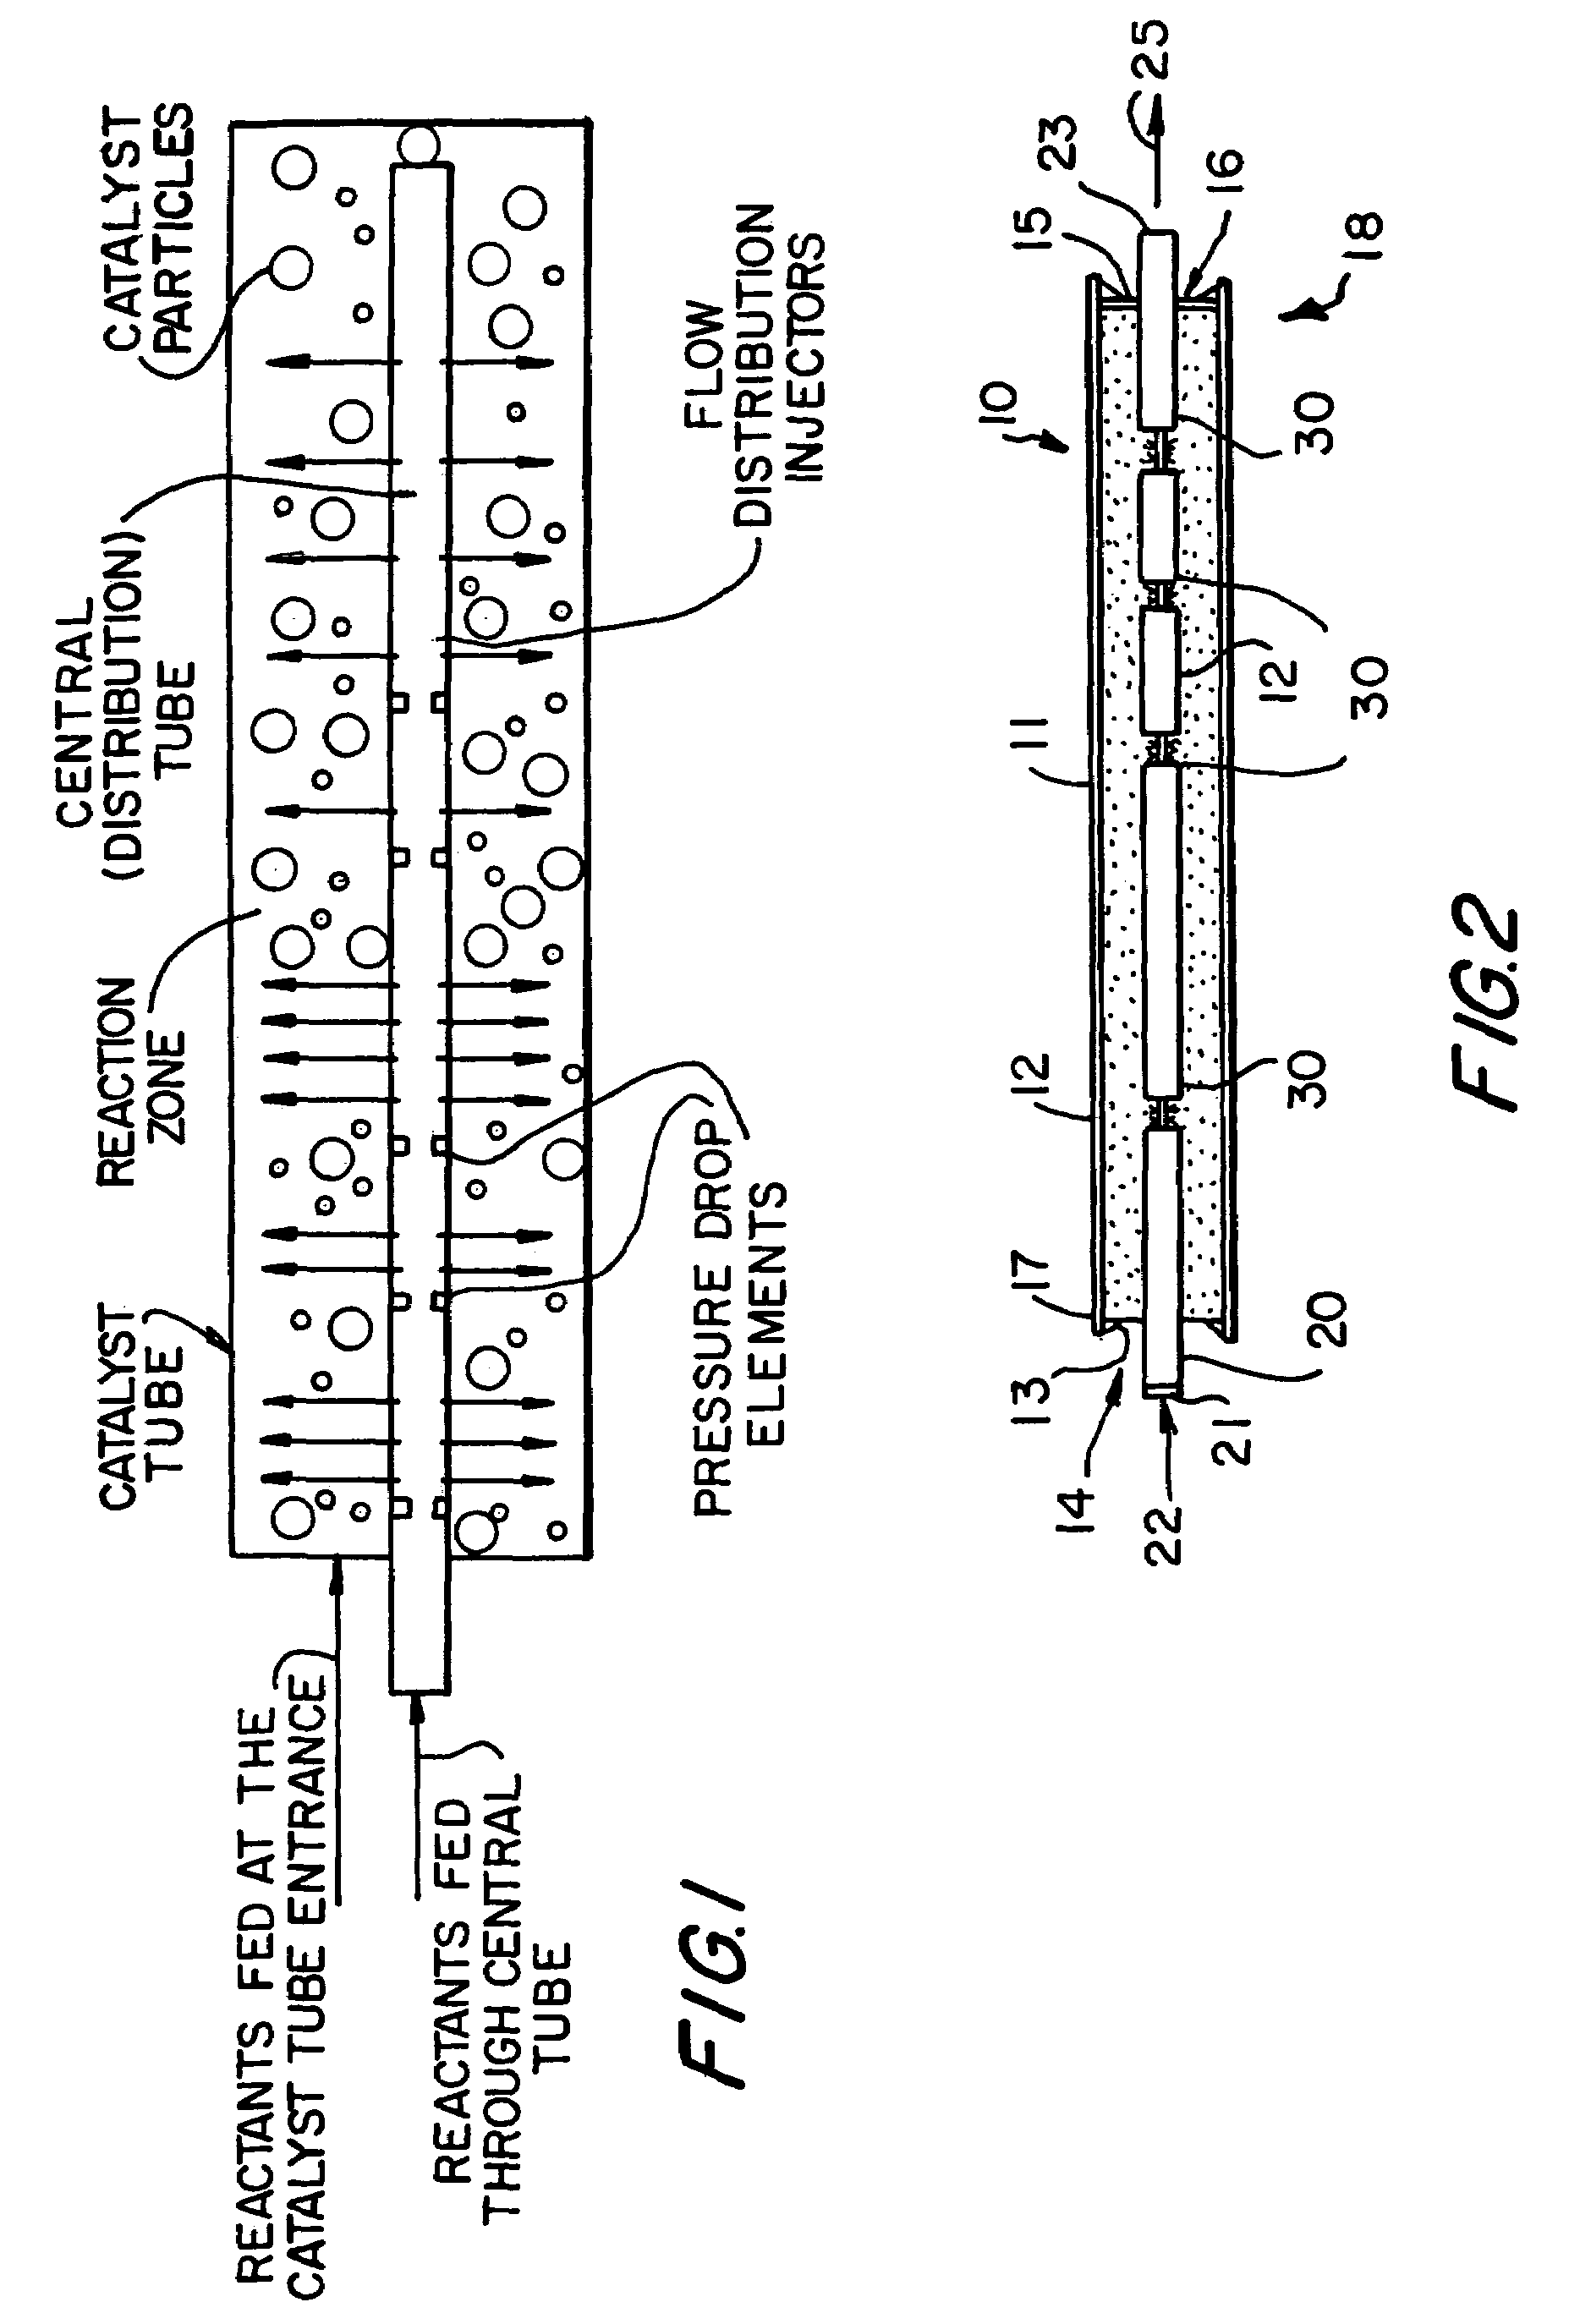 Apparatus for the controlled optimized addition of reactants in continuous flow reaction systems